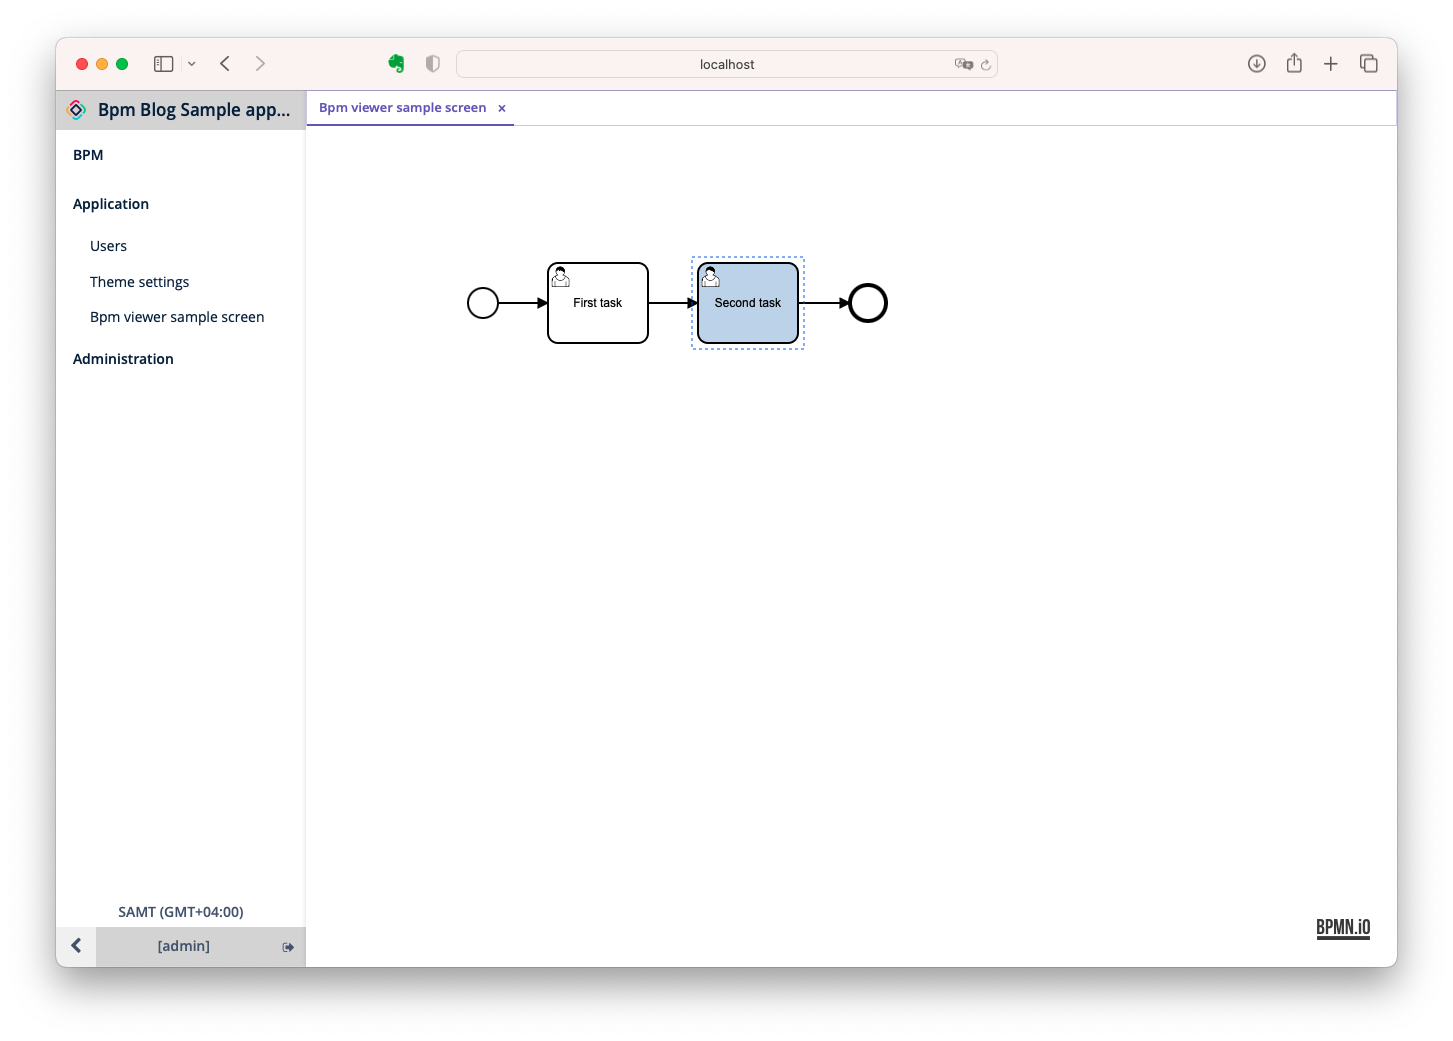 Rendered view with BPMN diagram